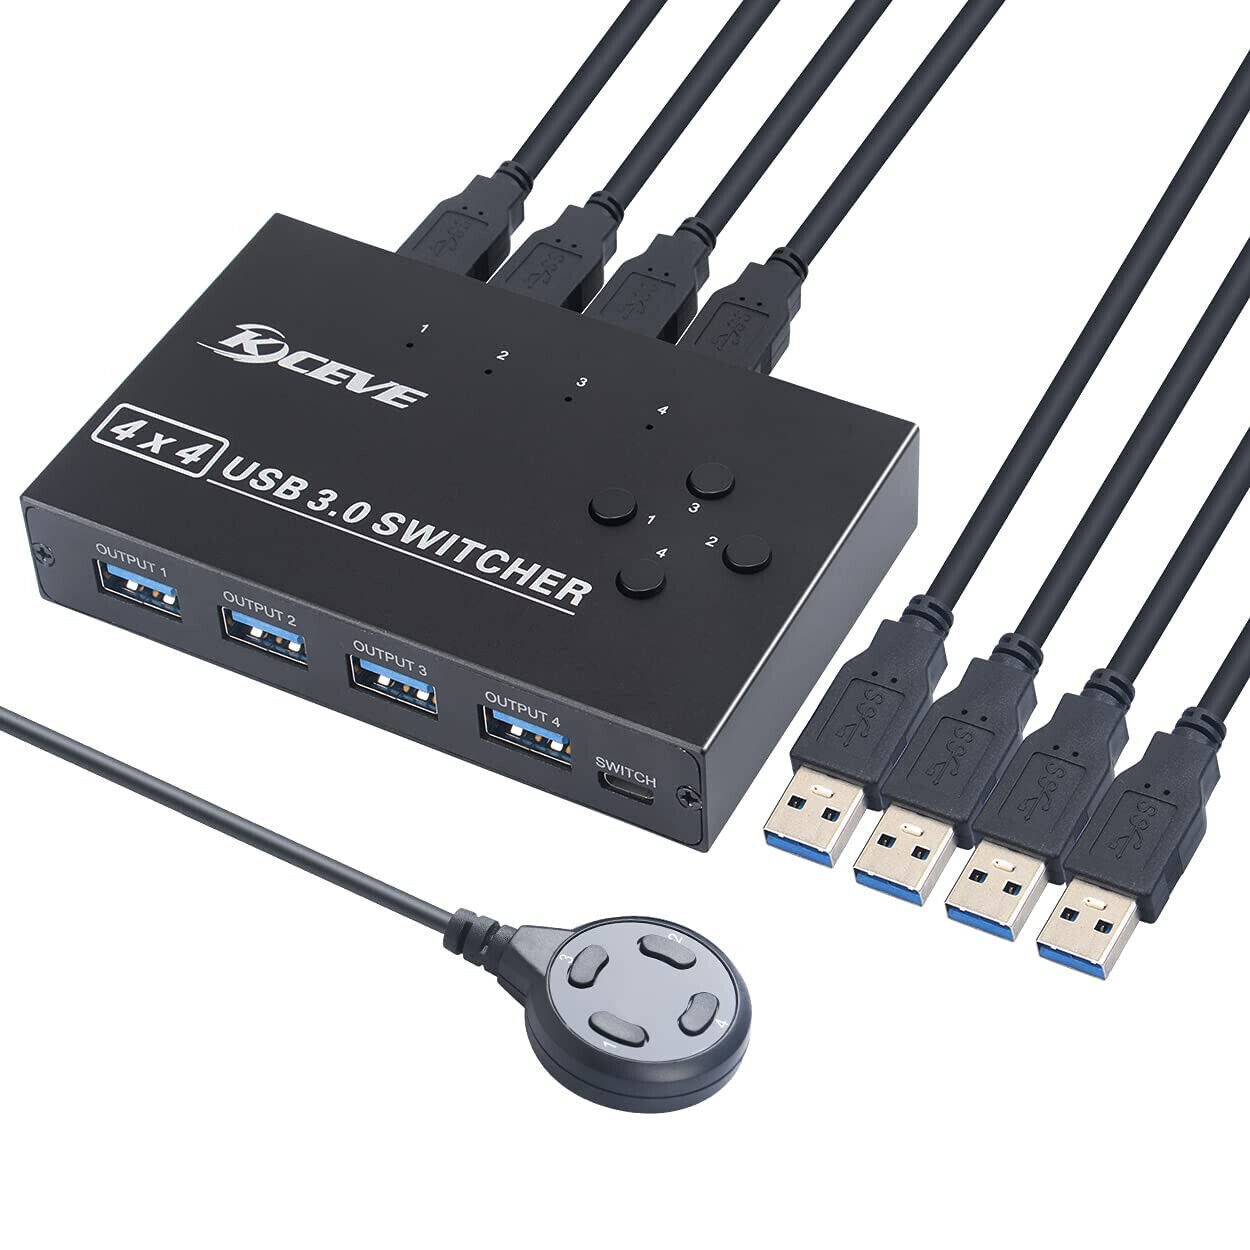 ✅ KCEVE USB 3.0 Switch, USB Switch Selector 4 Computer Sharing 4 USB Devices KVM